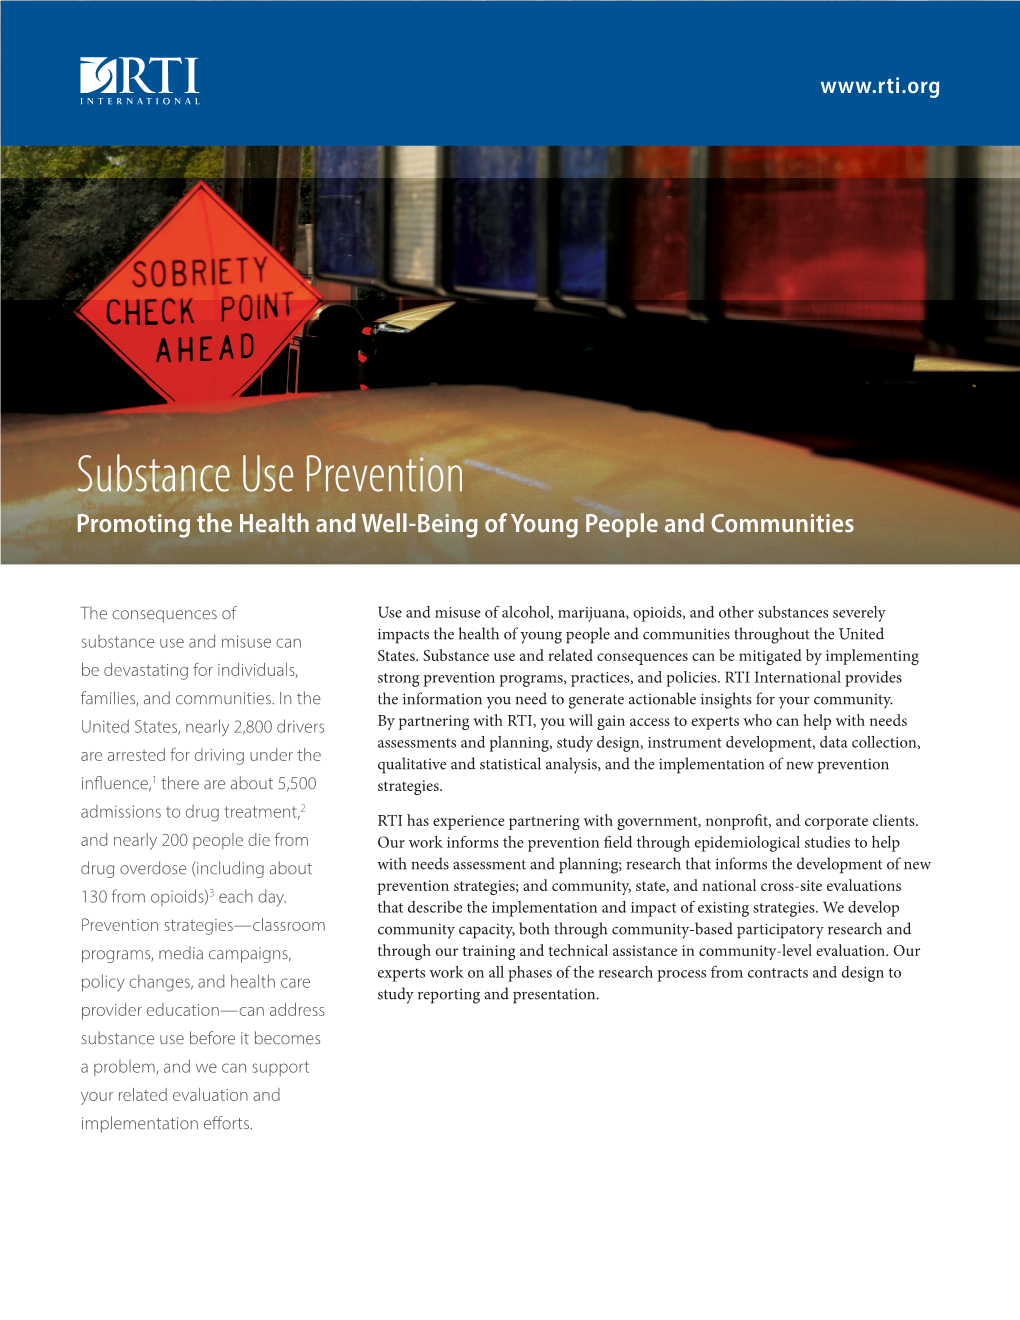 Substance Use Prevention Promoting the Health and Well-Being of Young People and Communities